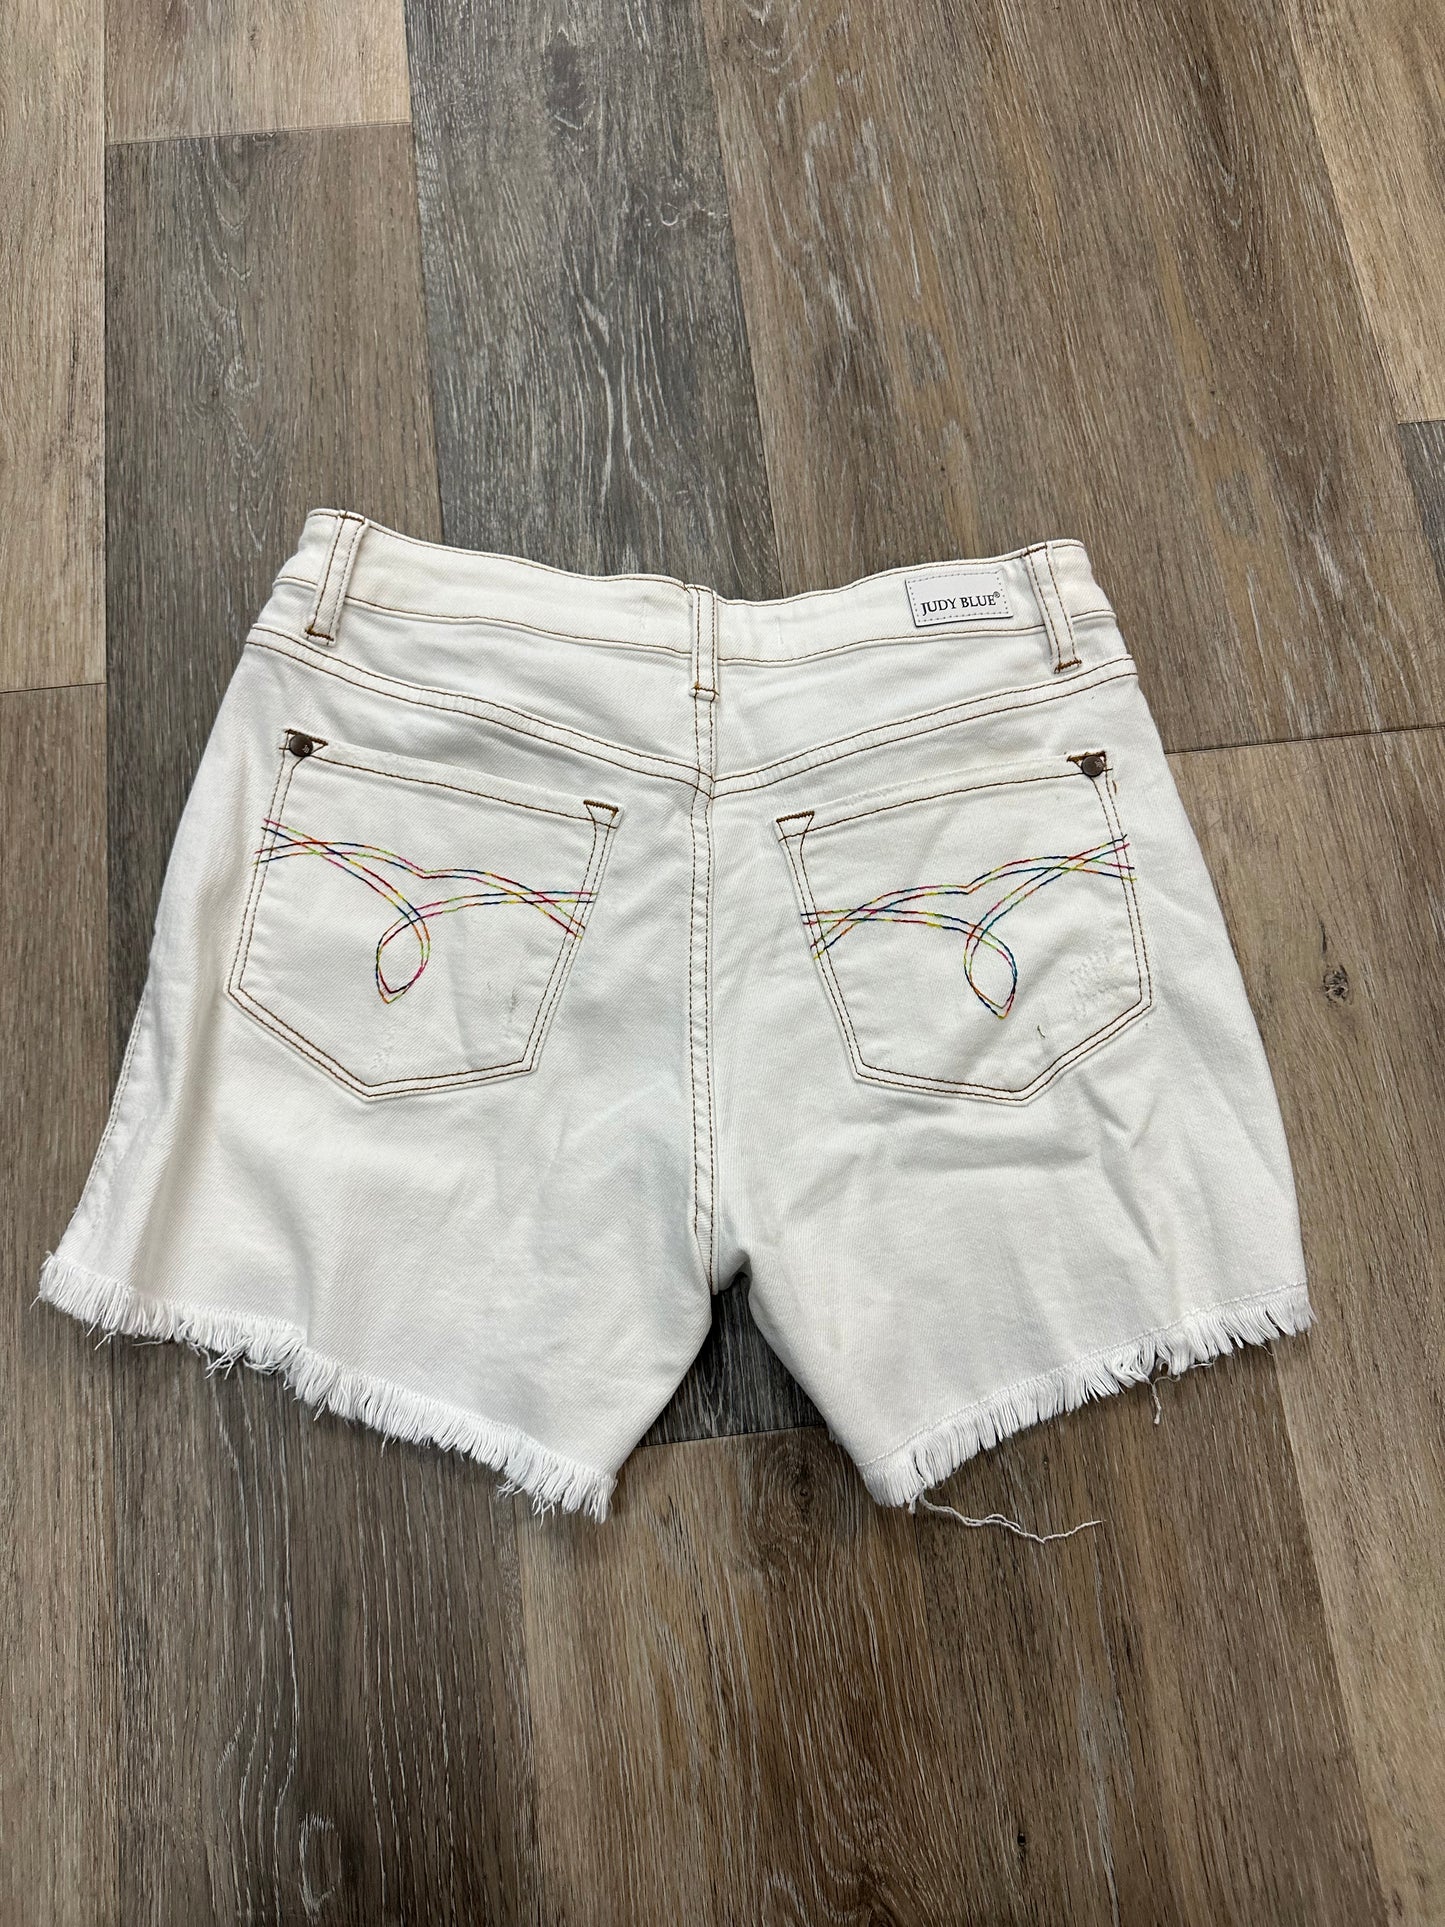 Shorts By Judy Blue  Size: M